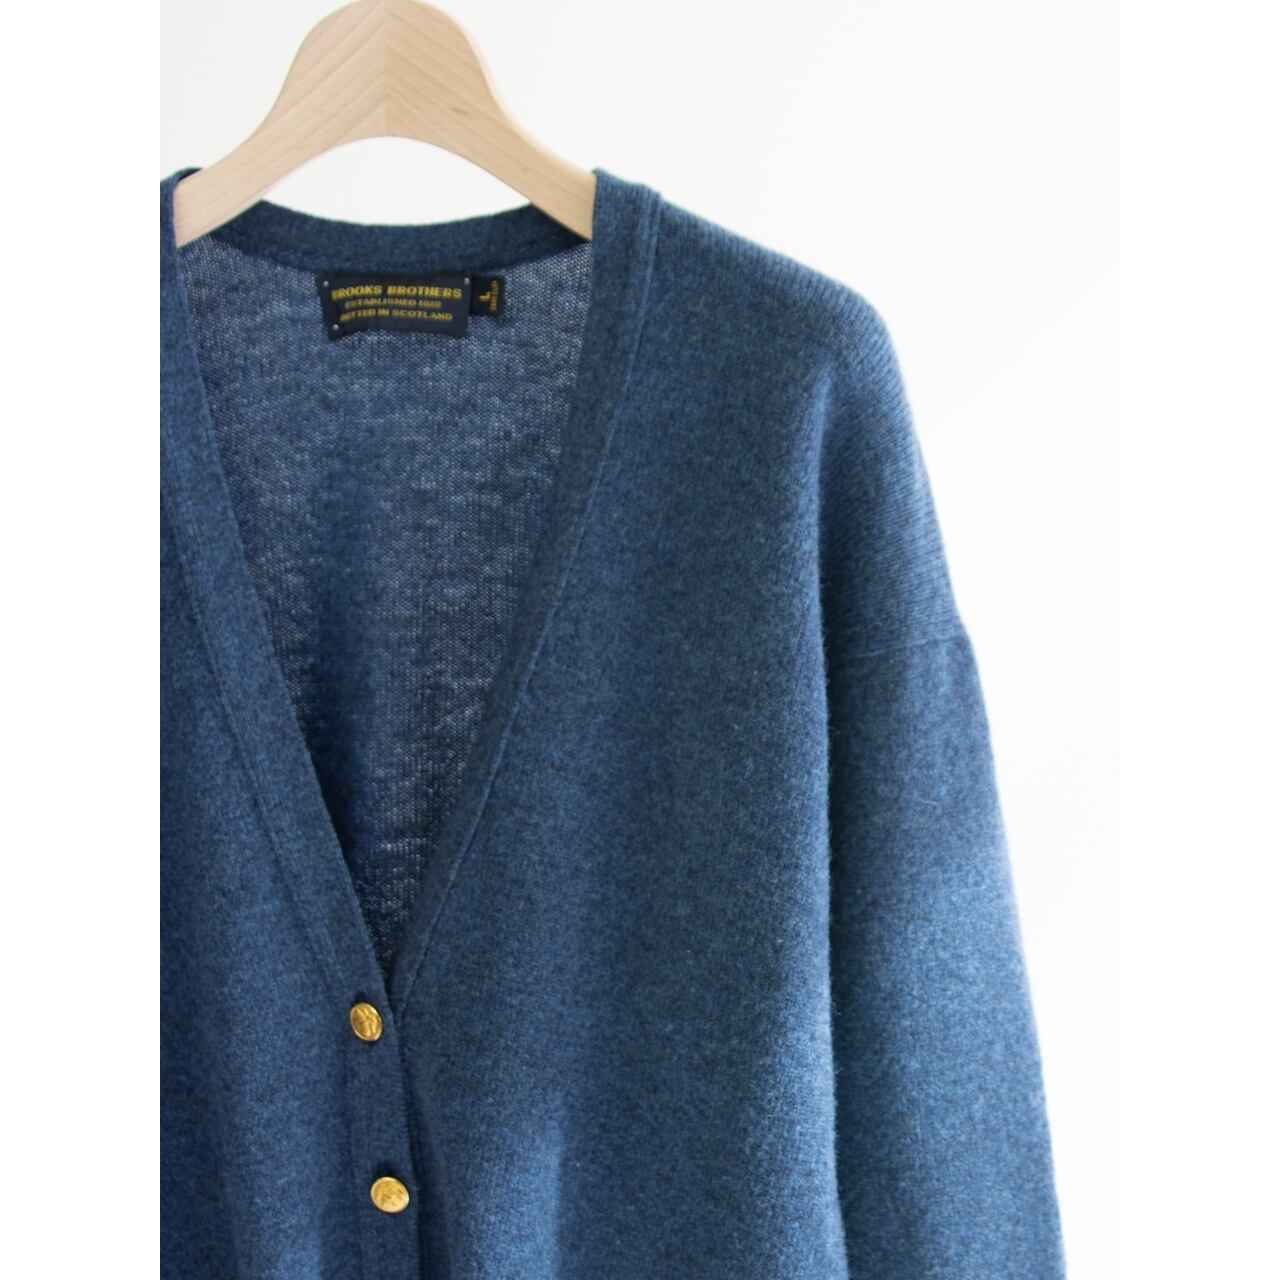 BROOKS BROTHERS】Knitted in Scotland 80's 100% Wool Knit Cardigan 